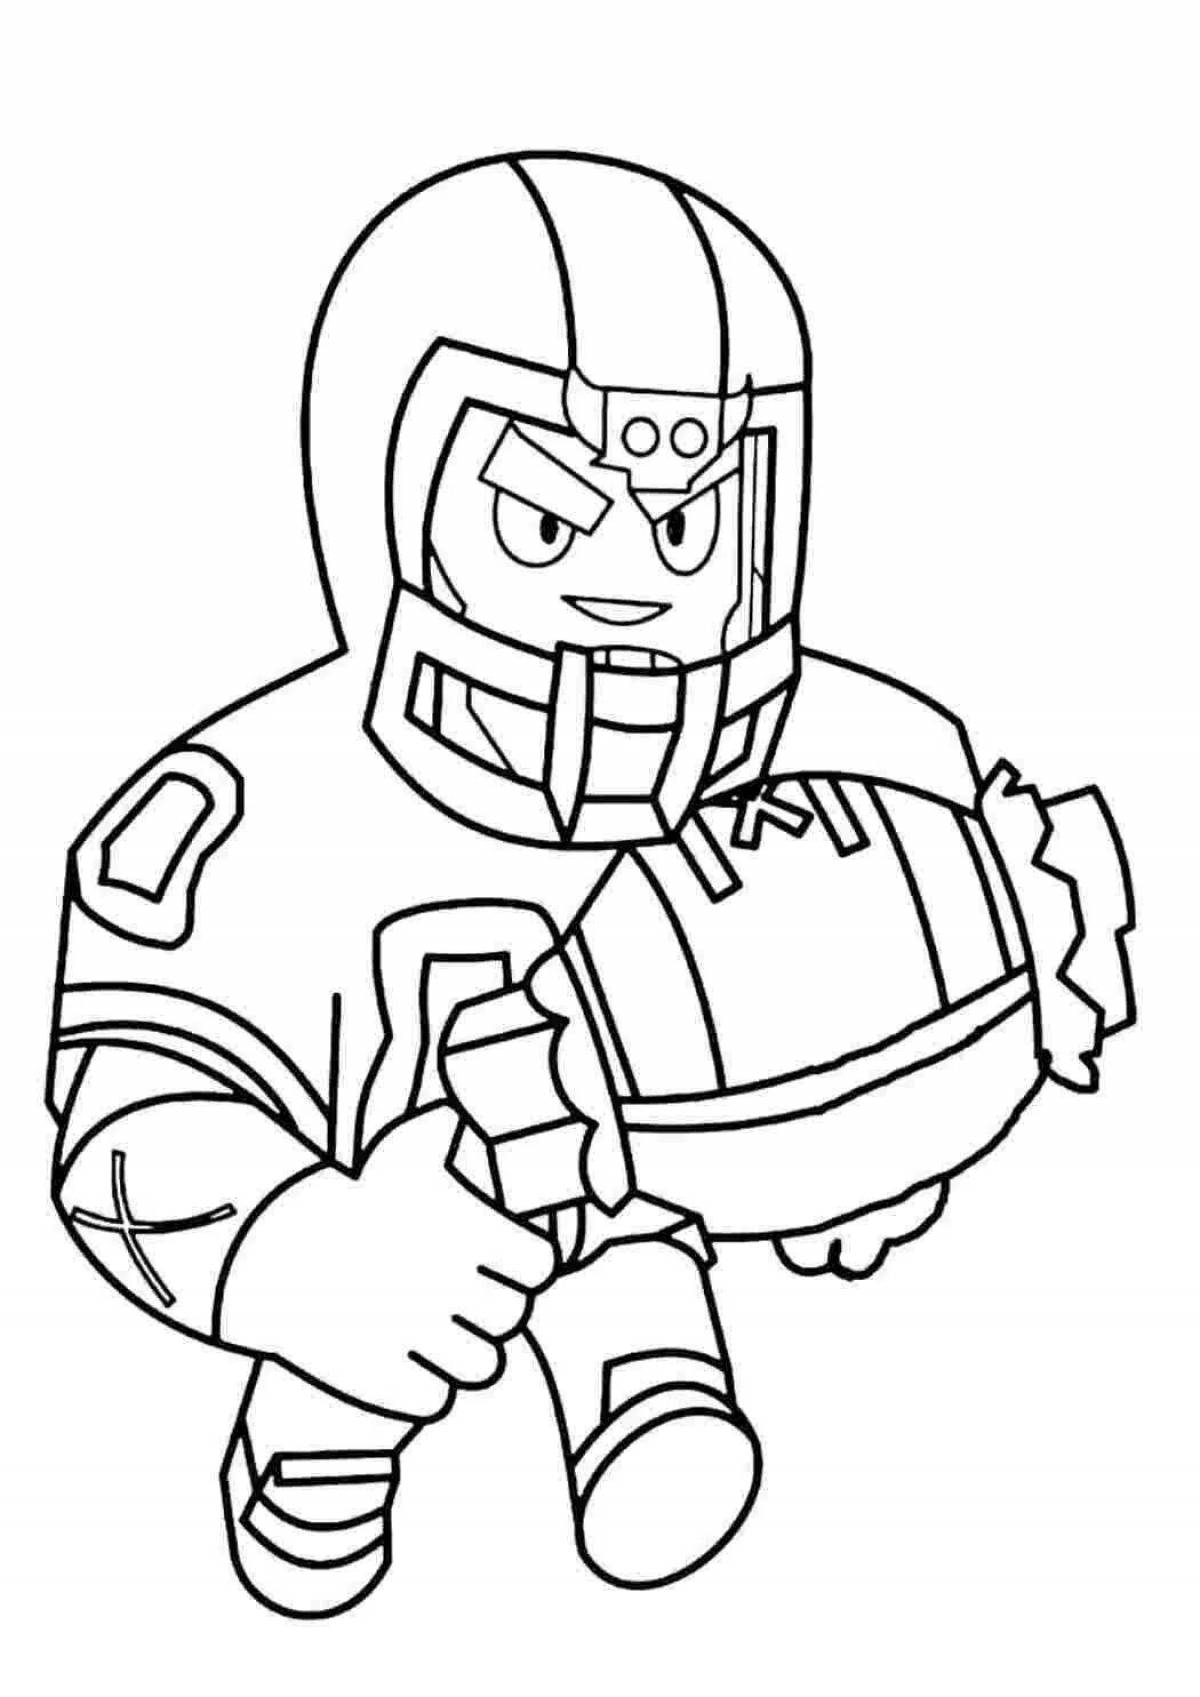 Awesome brawl stars skin coloring pages